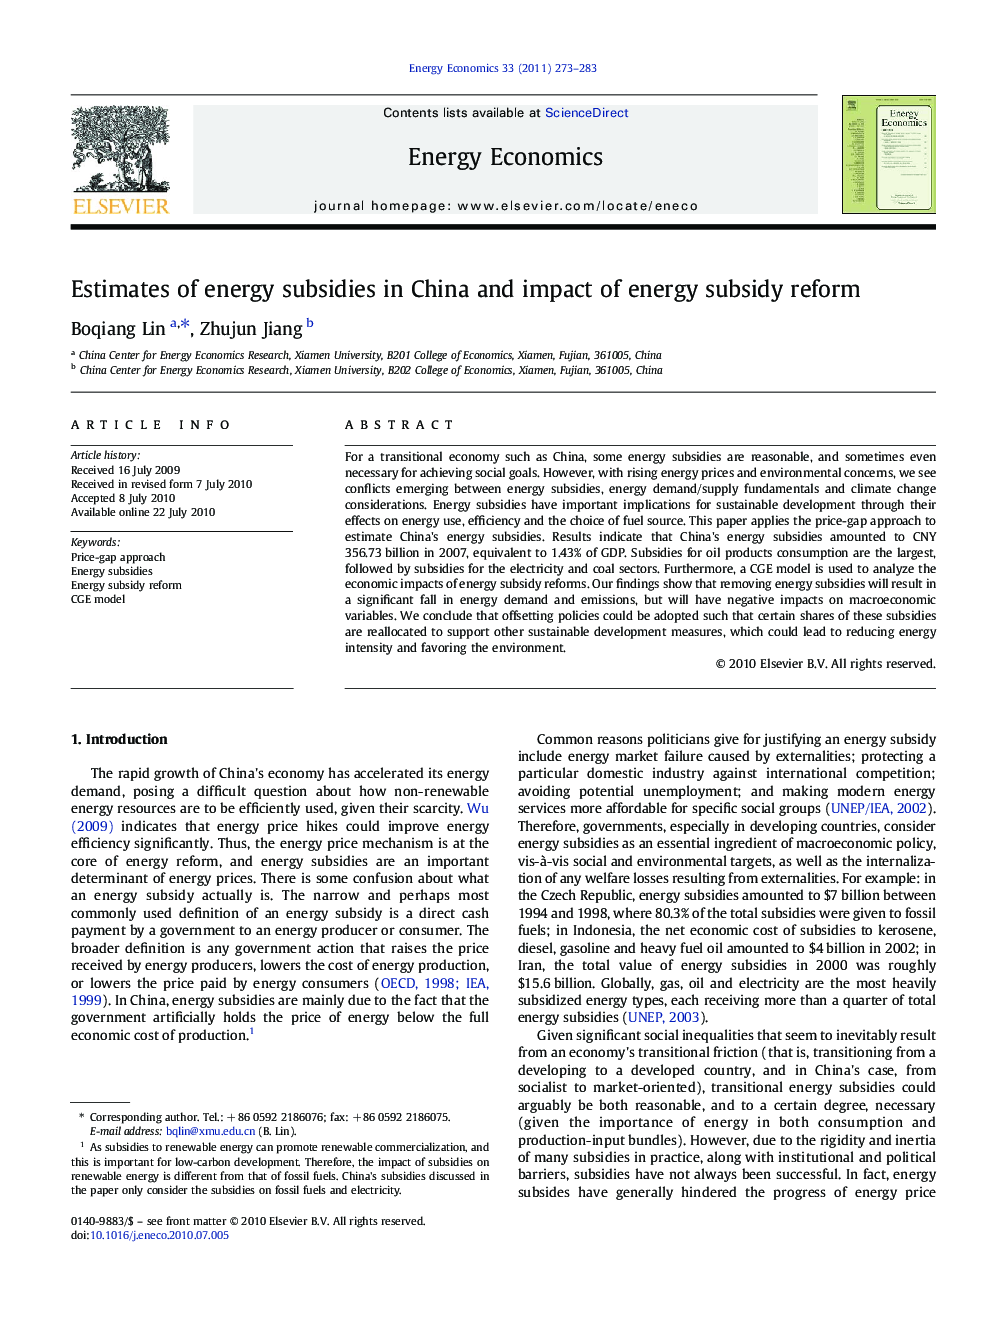 Estimates of energy subsidies in China and impact of energy subsidy reform